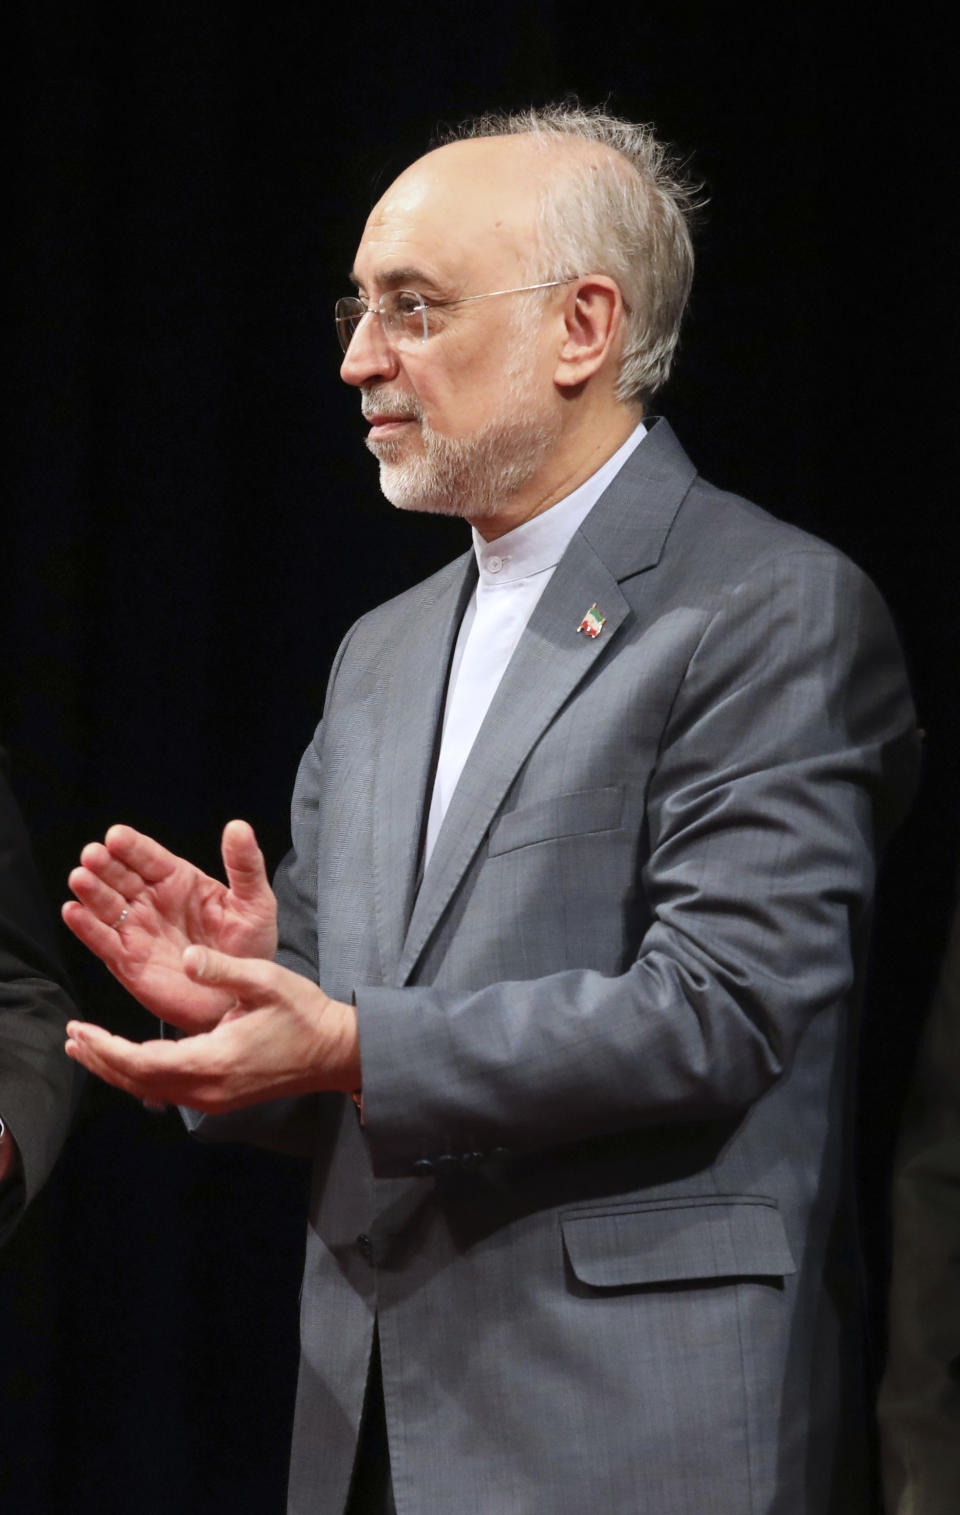 Head of the Atomic Energy Organization of Iran Ali Akbar Salehi applauds at the Mustafa scientific award ceremony, in Tehran, Iran, Monday, Nov. 11, 2019. Salehi told The Associated Press that Iran is now producing more low-enriched uranium daily after restarting an underground lab. Salehi made the comments on Monday as Iranian President Hassan Rouhani also called on hard-liners to support the country's troubled nuclear deal as it could open up international arms sales for the Islamic Republic next year. (AP Photo/Vahid Salemi)